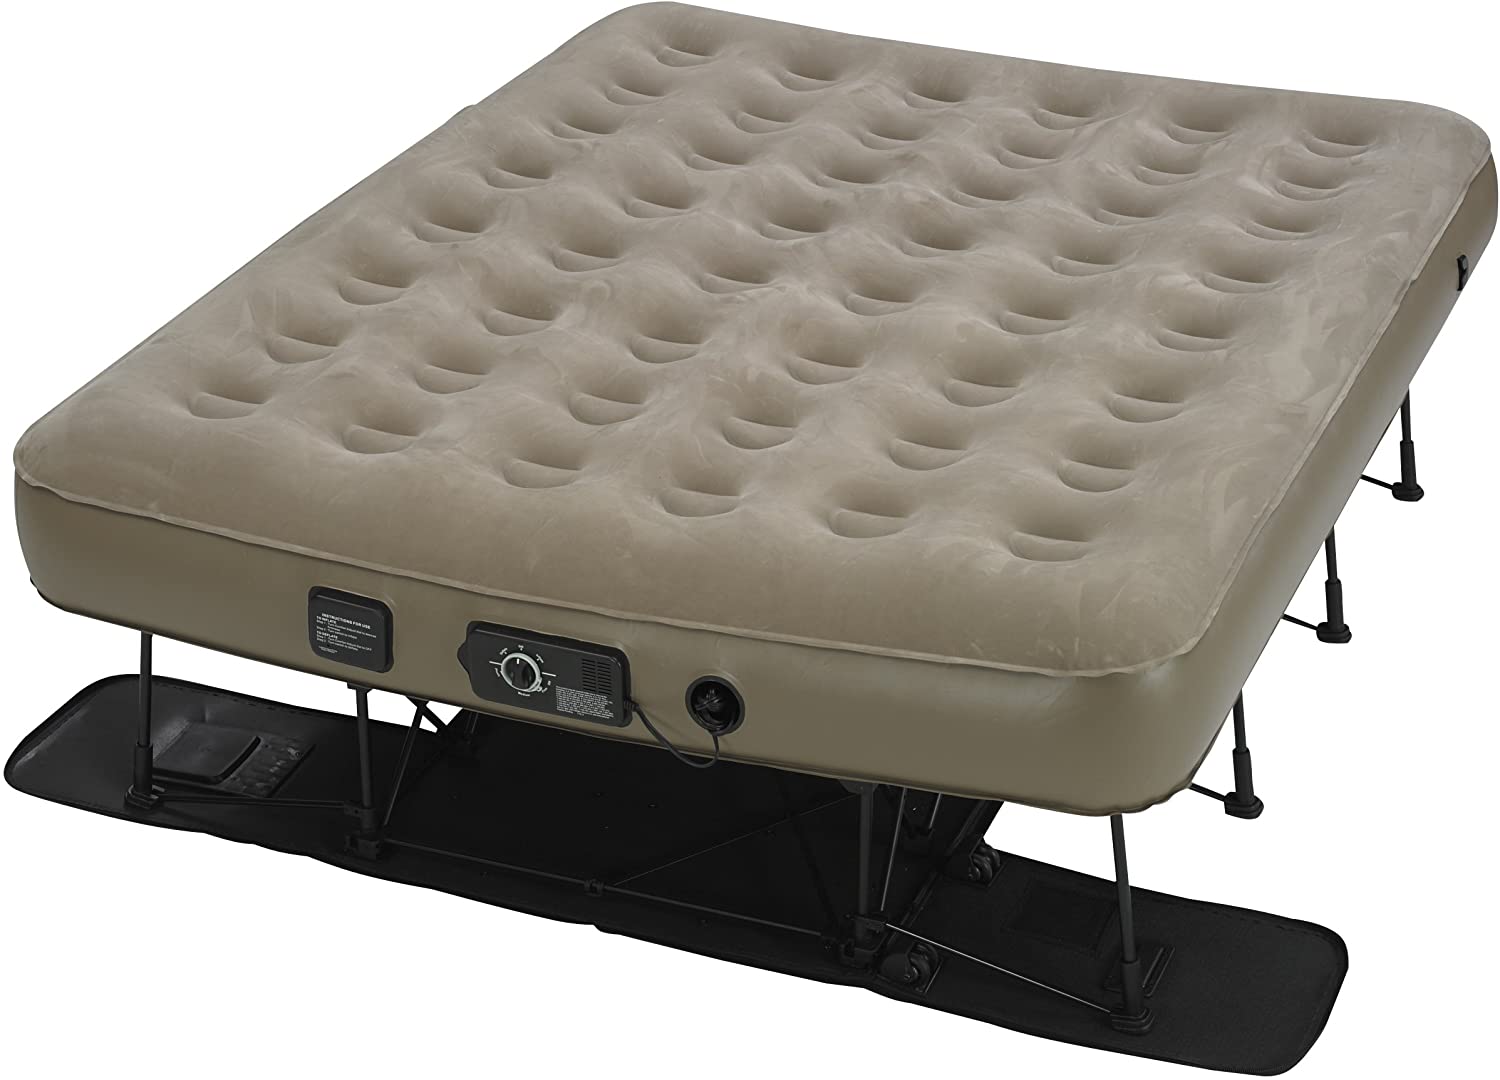 cot or air mattress for camping